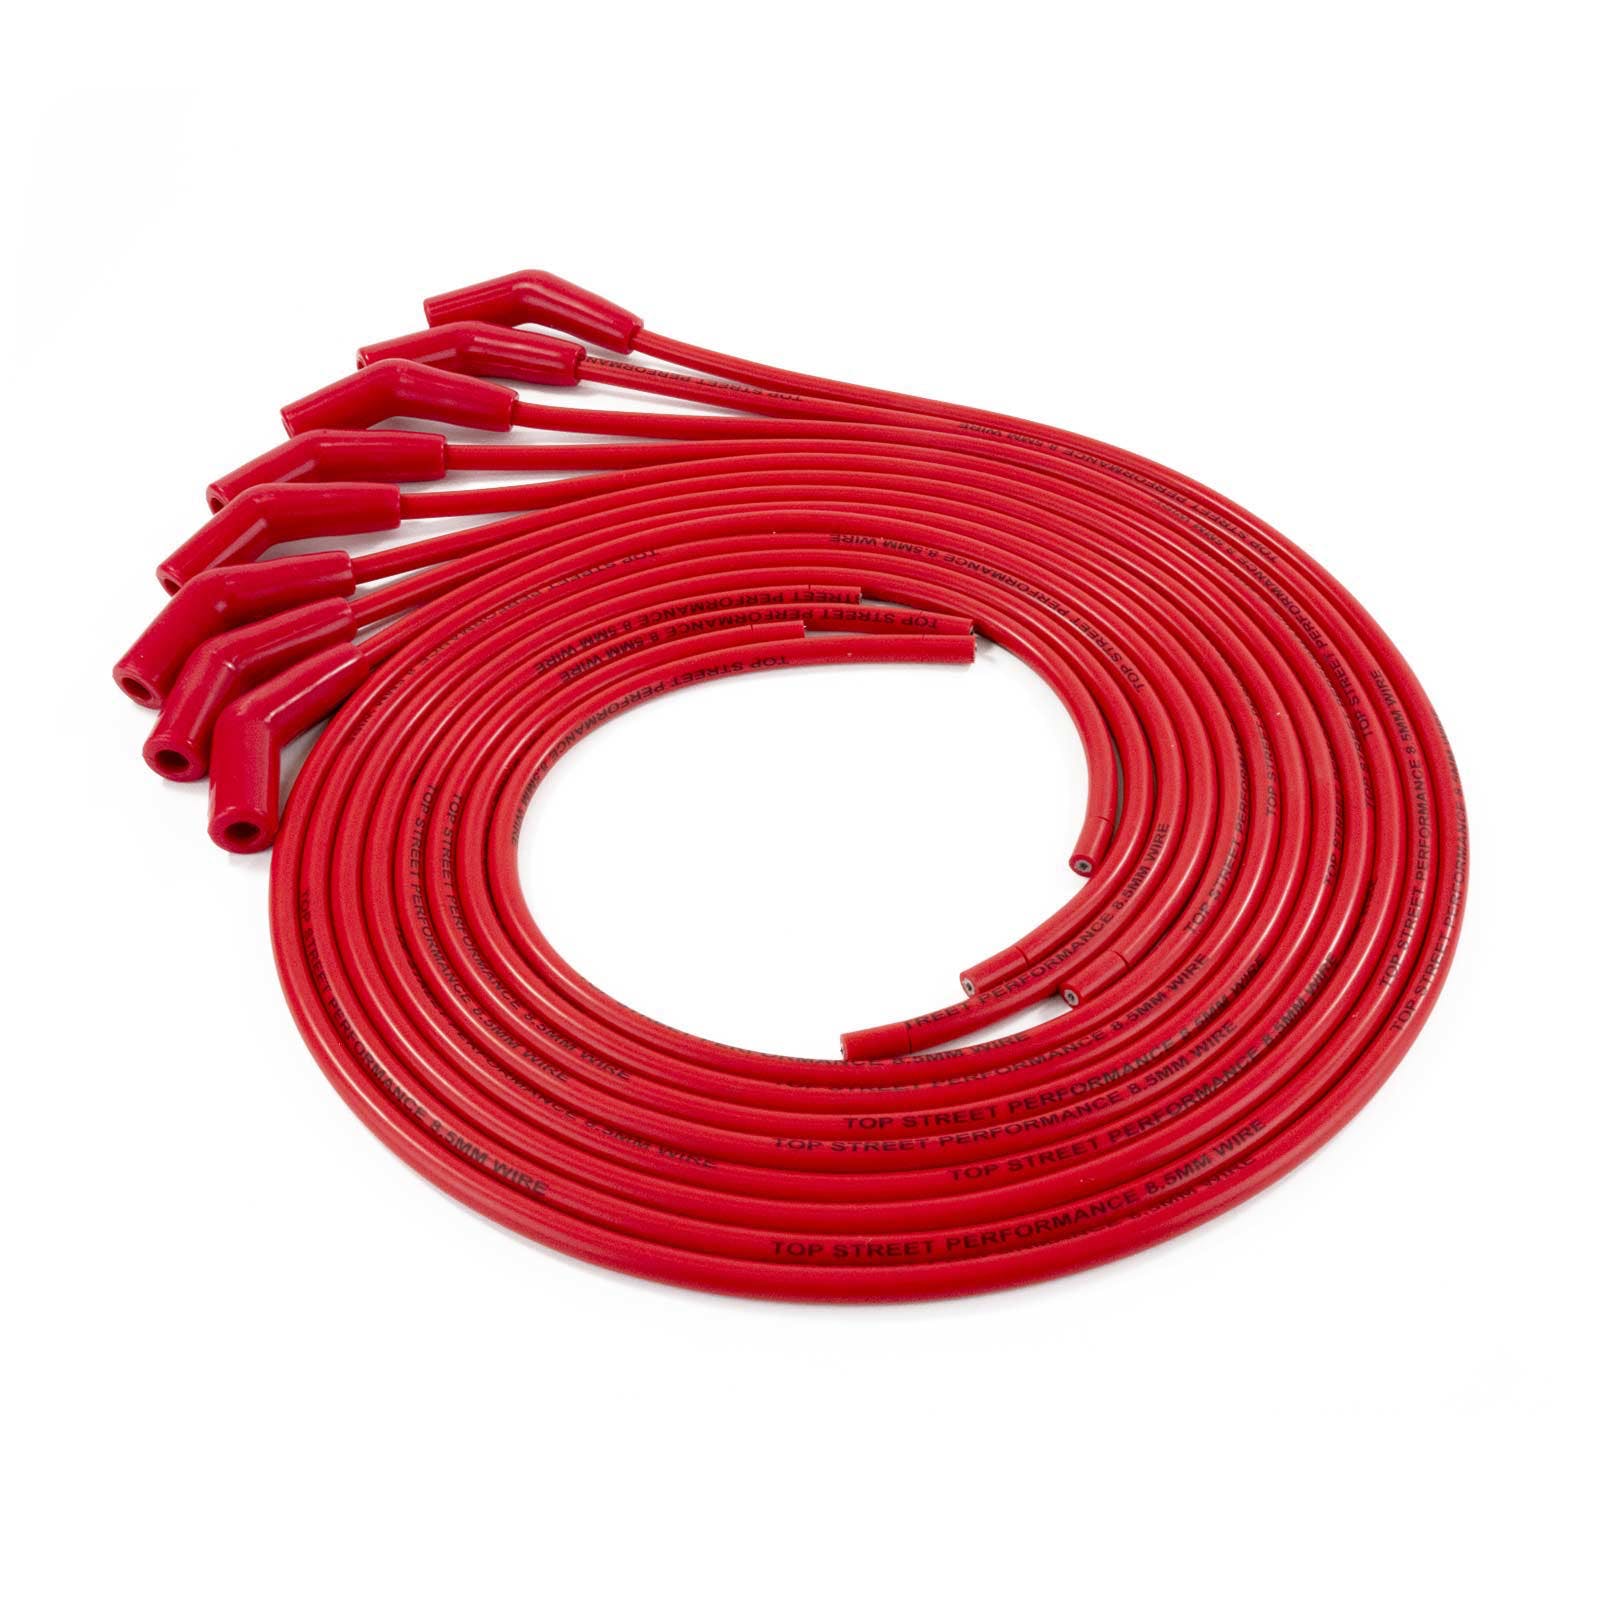 Top Street Performance 85235 Spark Plug Wire Set, Universal Fit 8.5mm with 135 degree Plug Boots, Red